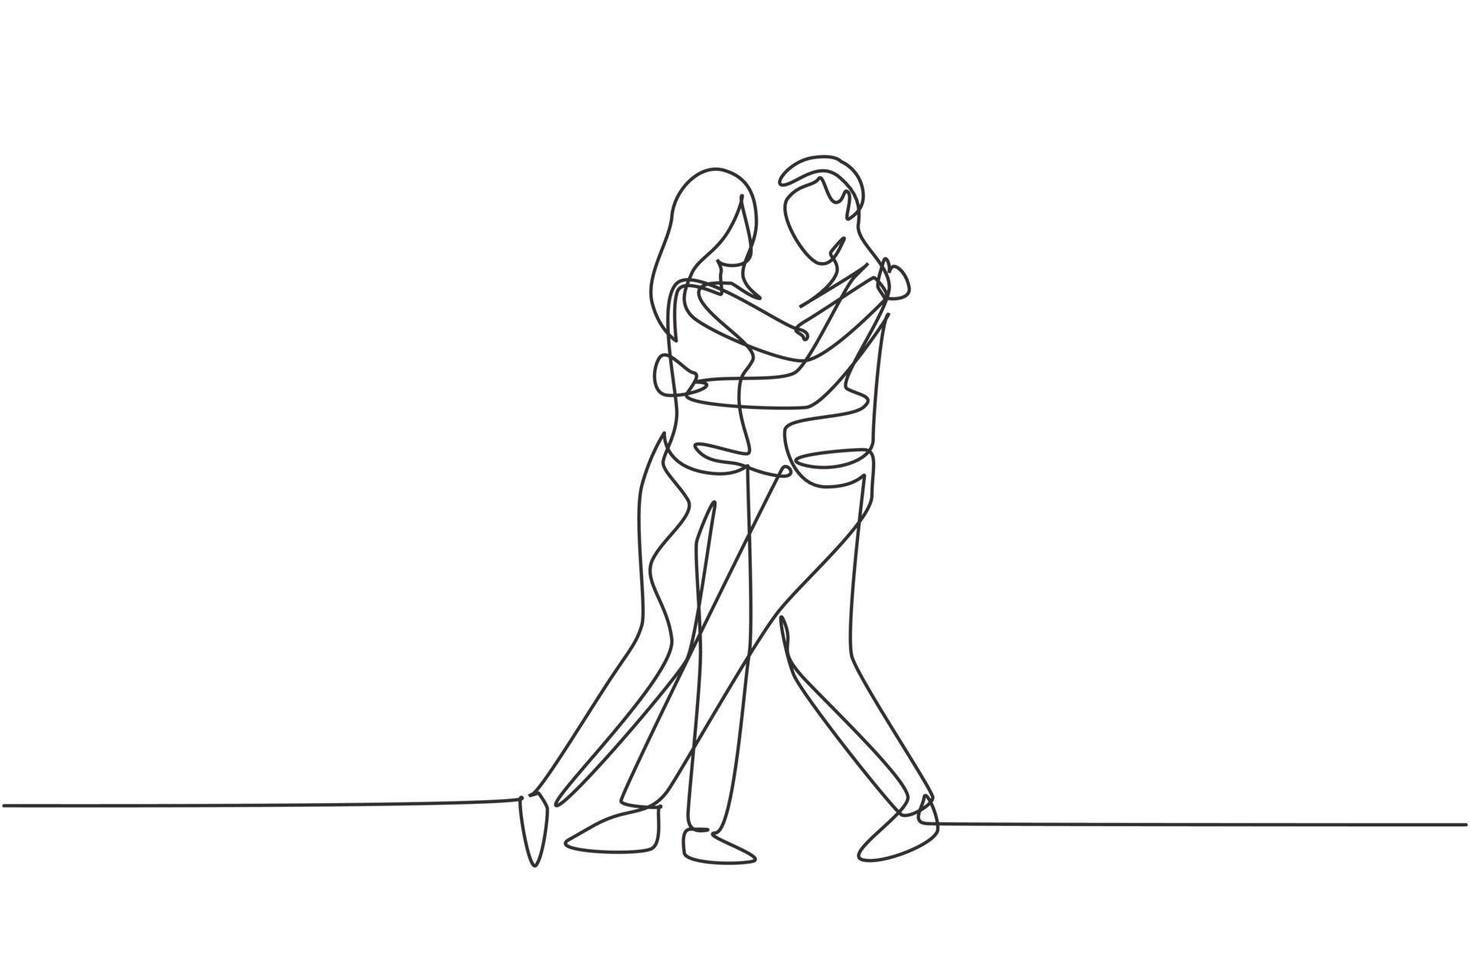 Continuous one line drawing happy people dancing salsa. Couples, man and woman in dance. Pairs of dancers with waltz tango and salsa styles moves. Single line draw design vector graphic illustration